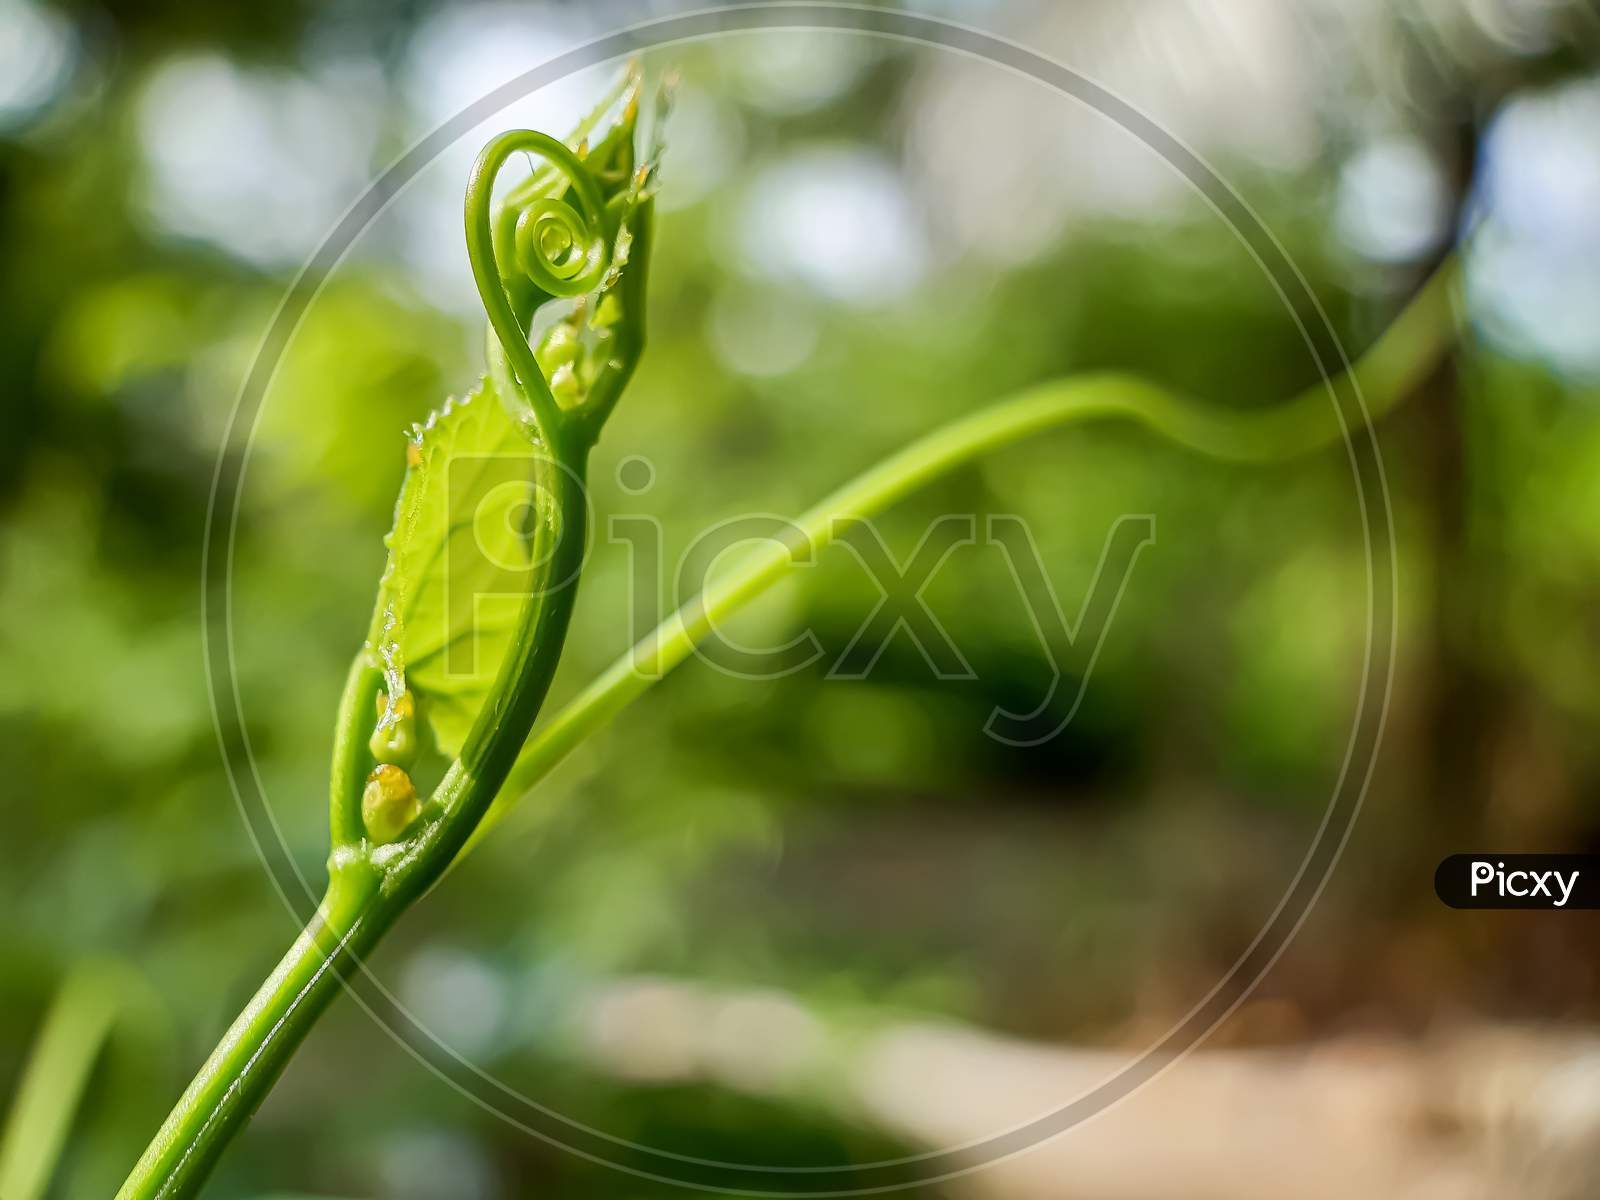 The Young Leaves Of The Green Vegetable Tree And The Green Background On The Back.